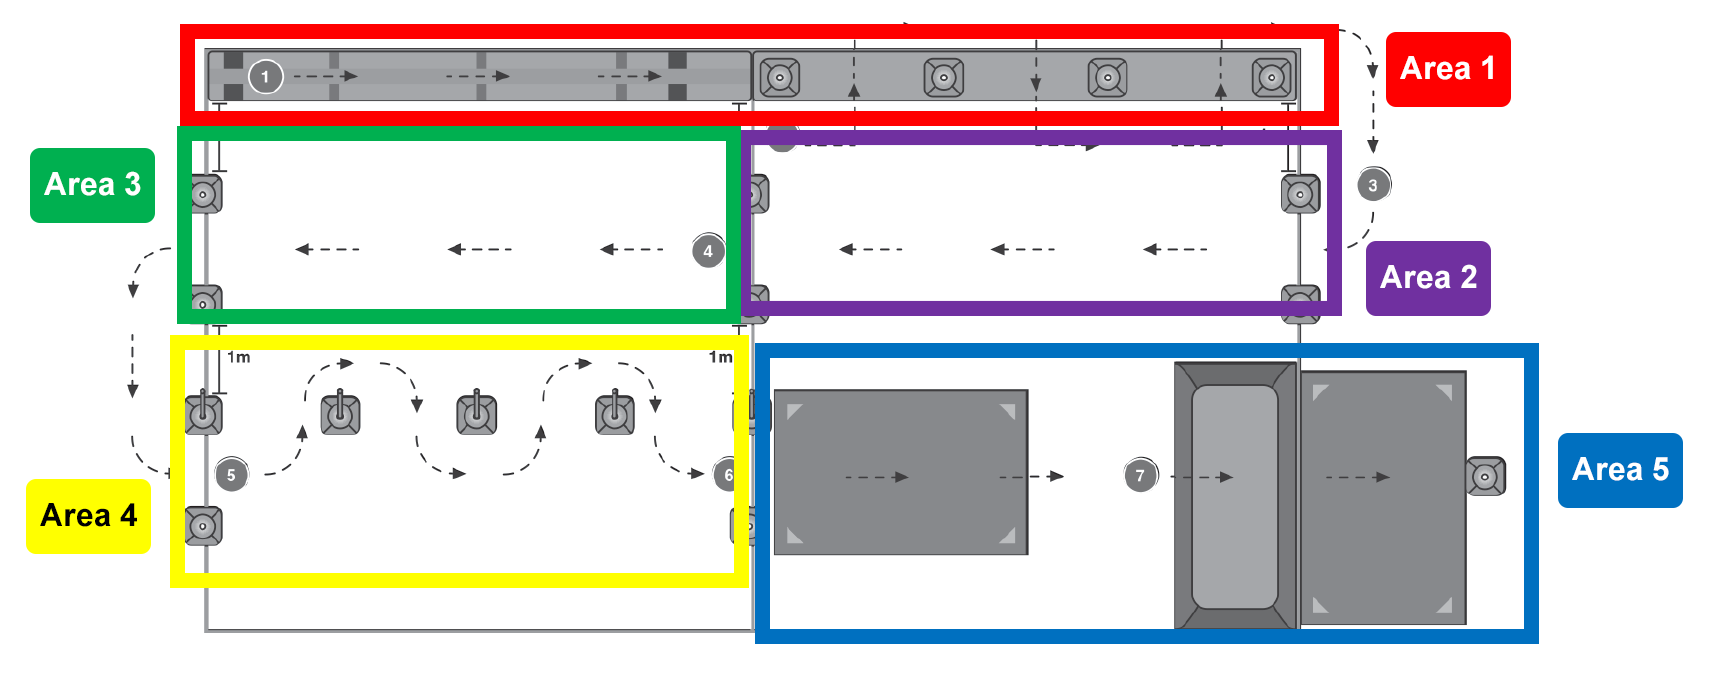 Read the instructions under the heading Space, equipment and preparation. This gives a detailed explanation of how to set up the equipment for each of the coloured boxes. This diagram provides a visual to support the instructions provided.